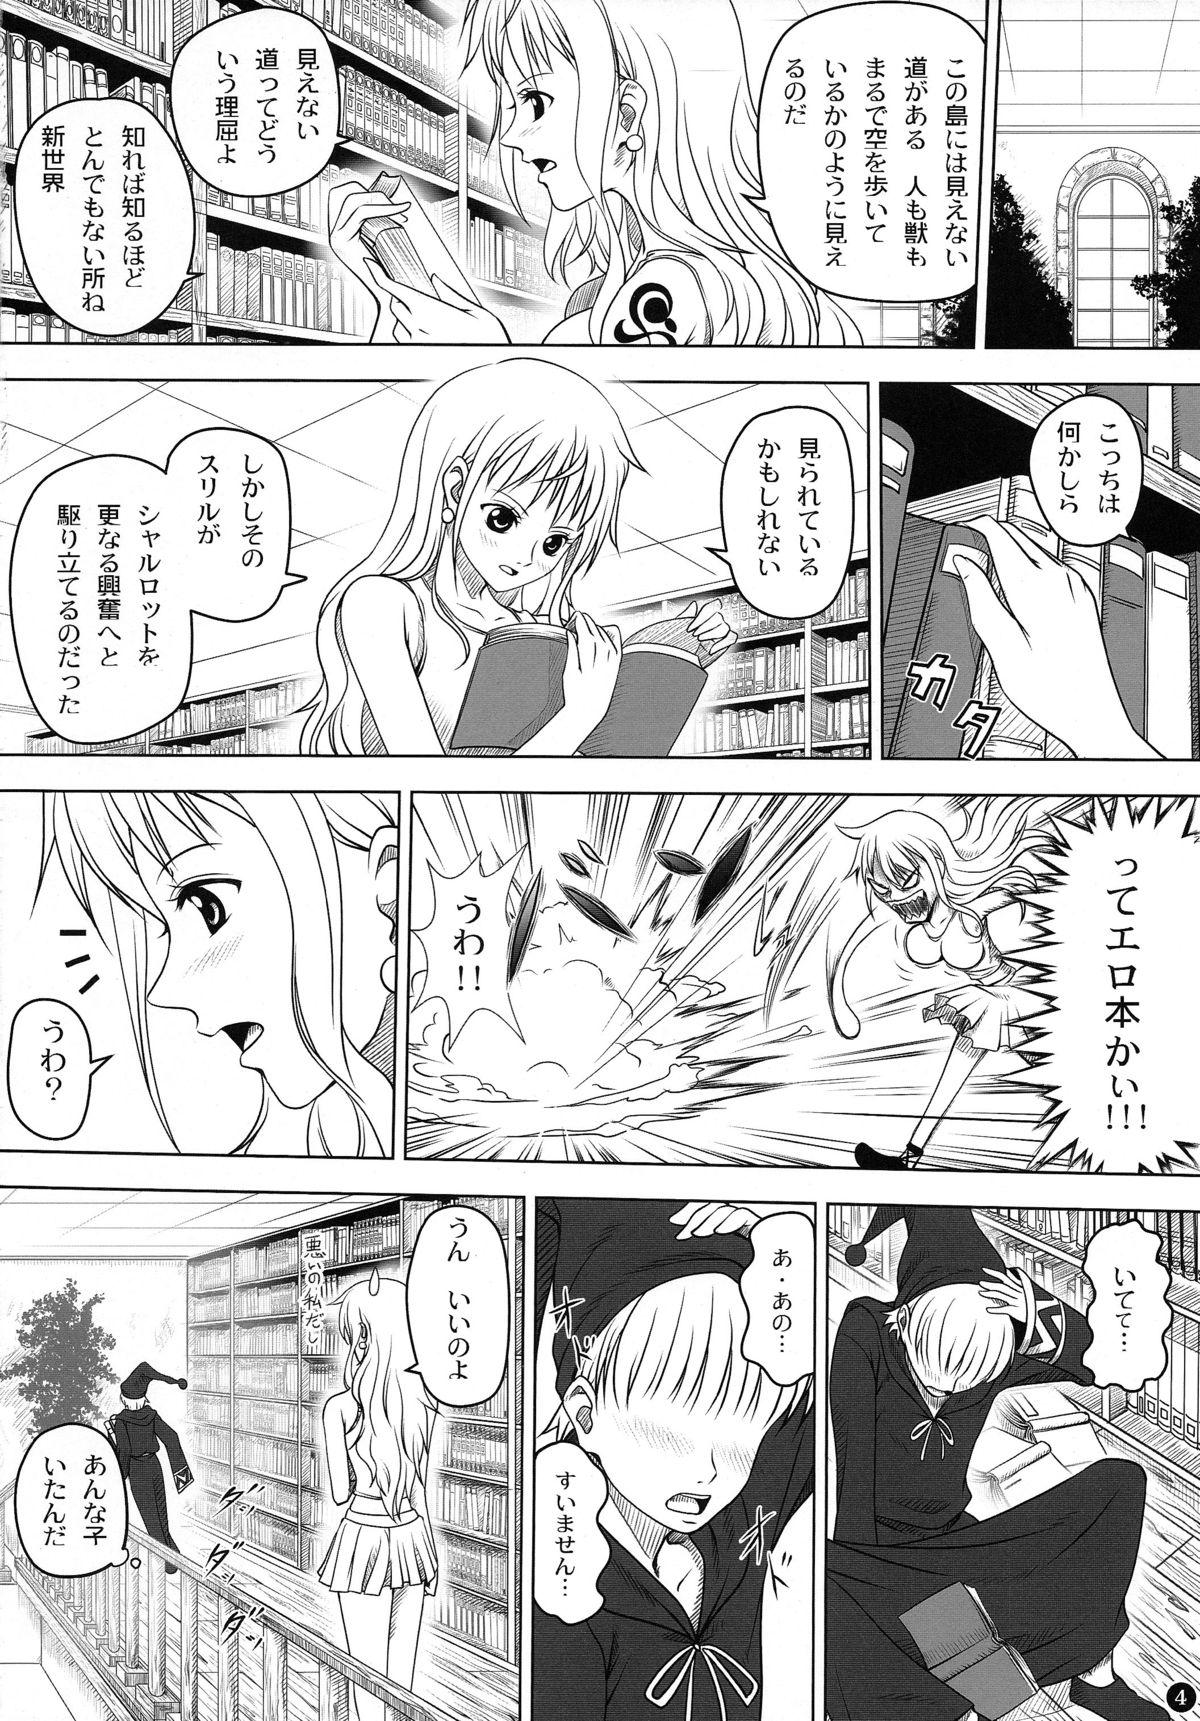 Horny Sluts Weather report - One piece Seduction - Page 4